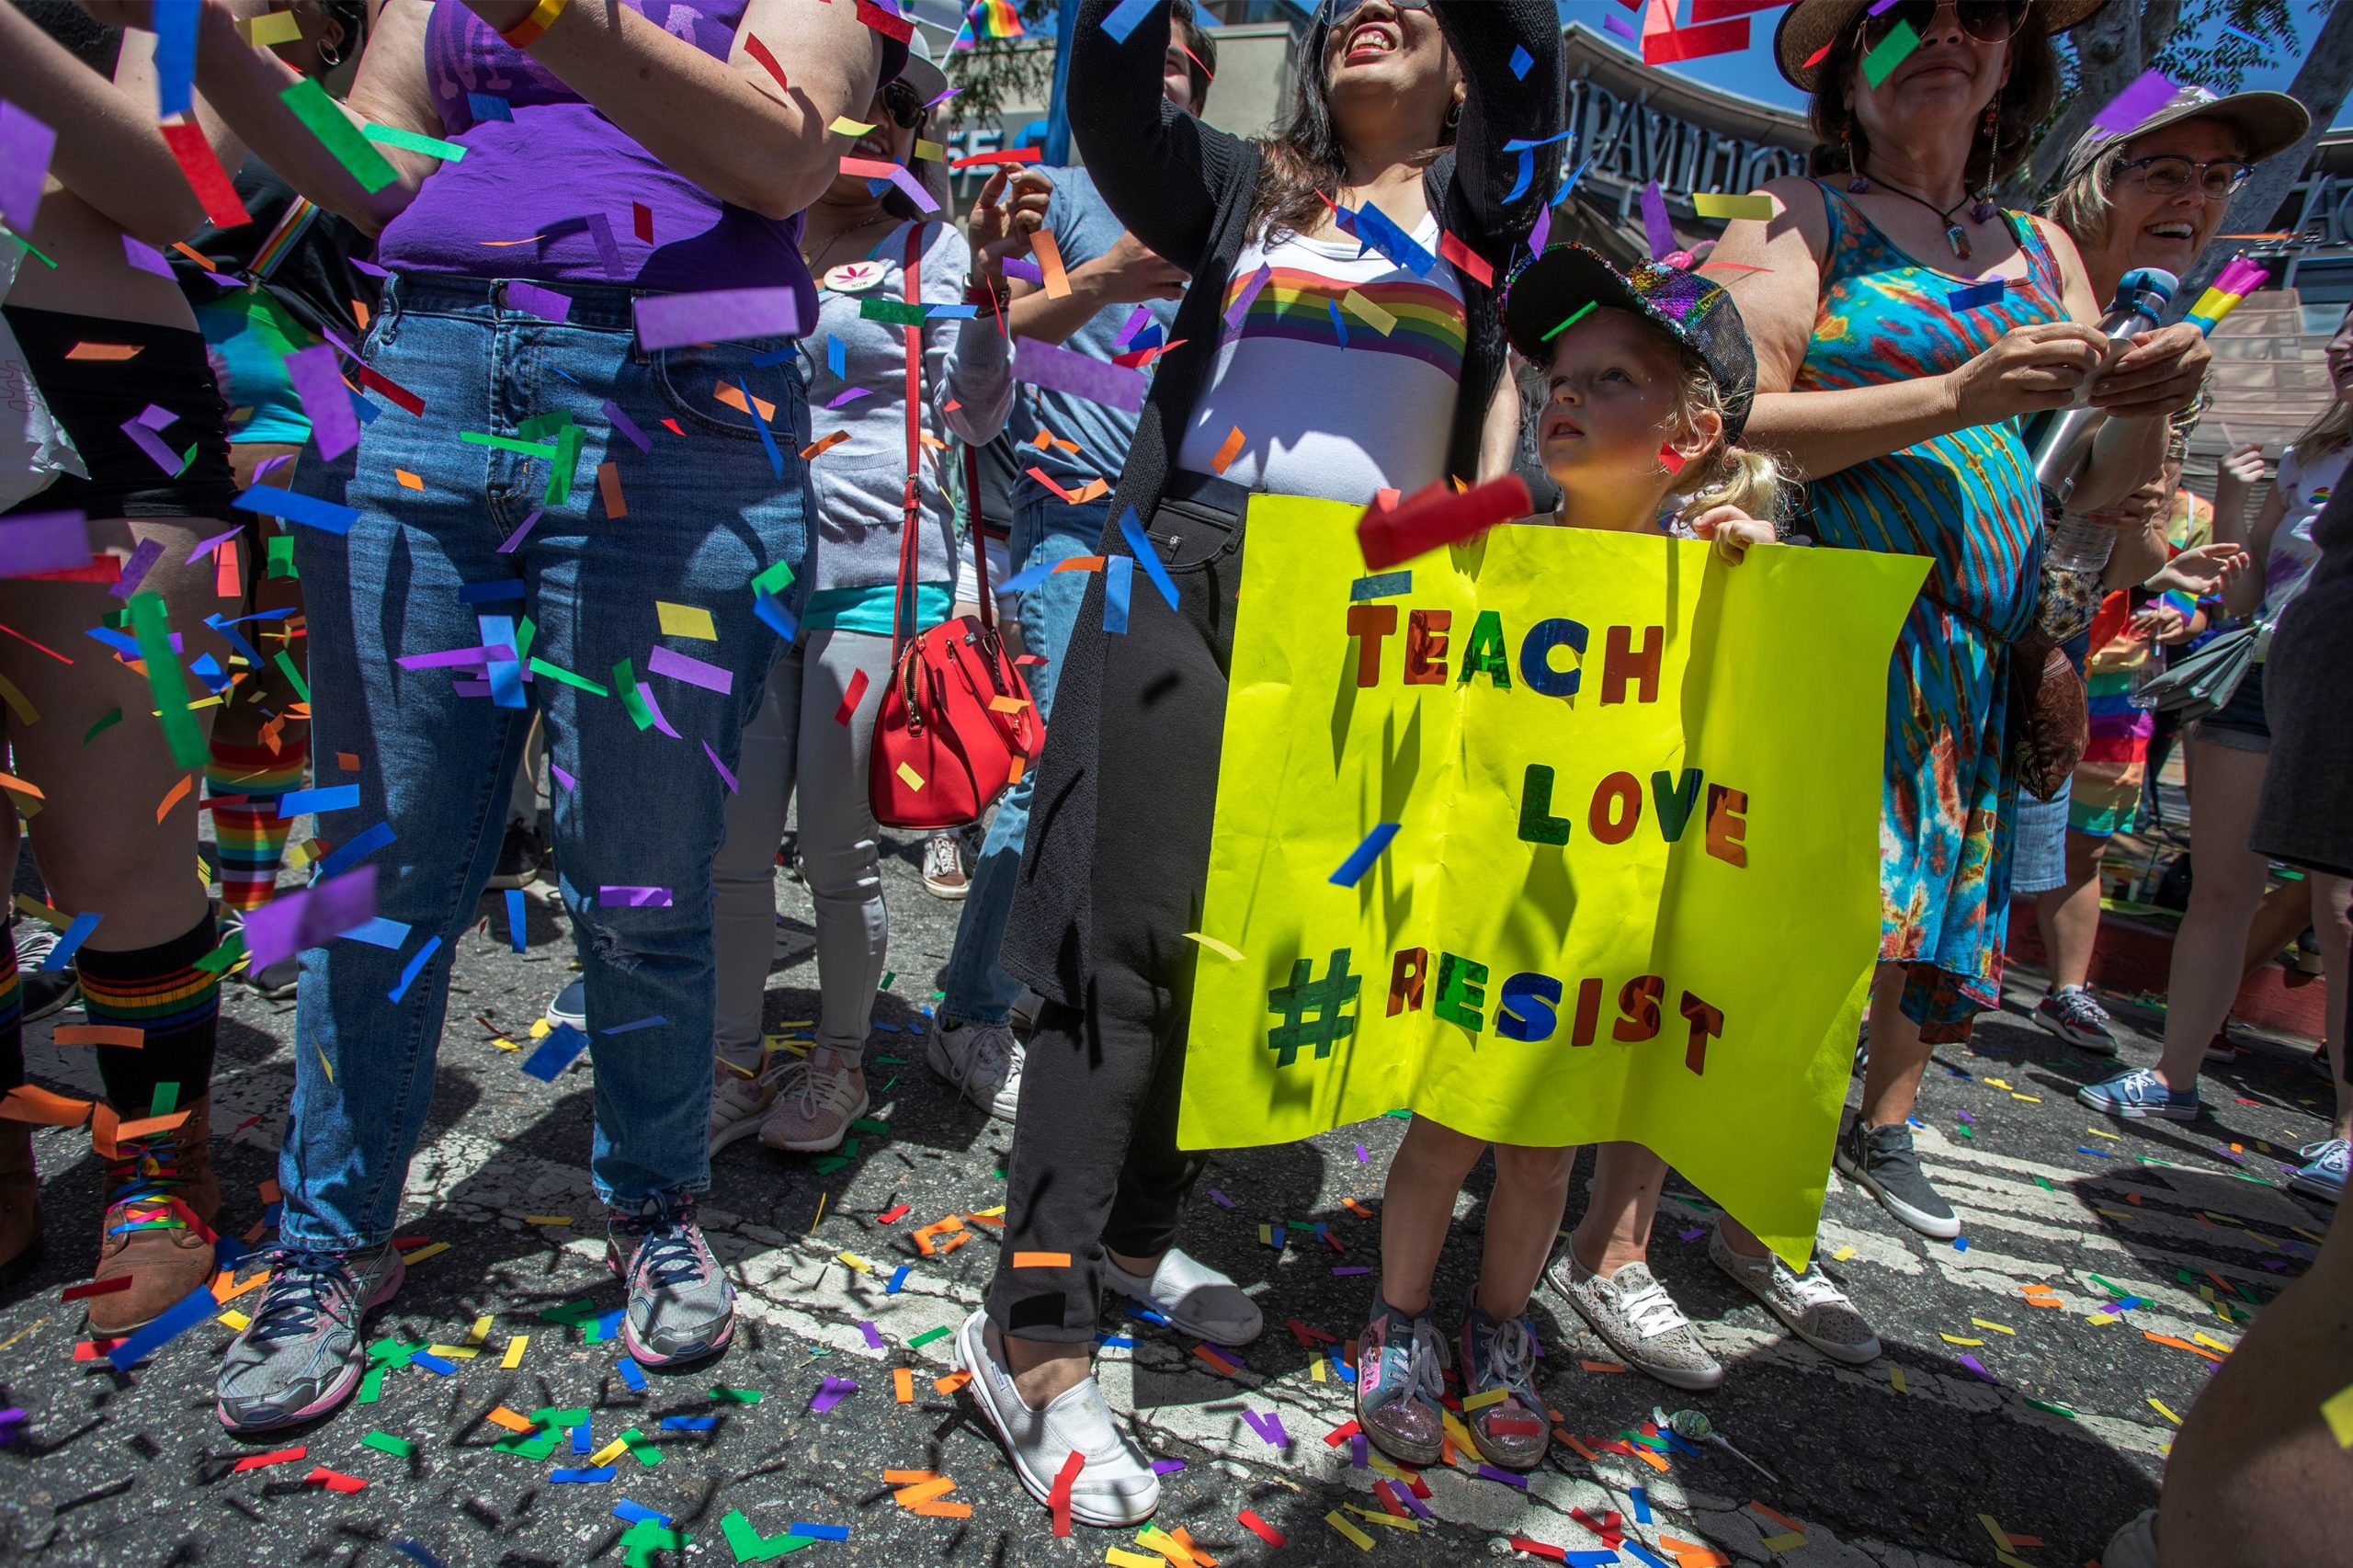 A young girl holds a sign during the annual LA Pride Parade in West Hollywood, California, on June 9, 2019. - LA Pride began on June 28, 1970, exactly one year after the historic Stonewall Rebellion in New York City, 50 years ago. (Photo by DAVID MCNEW / AFP) (Photo credit should read DAVID MCNEW/AFP via Getty Images)